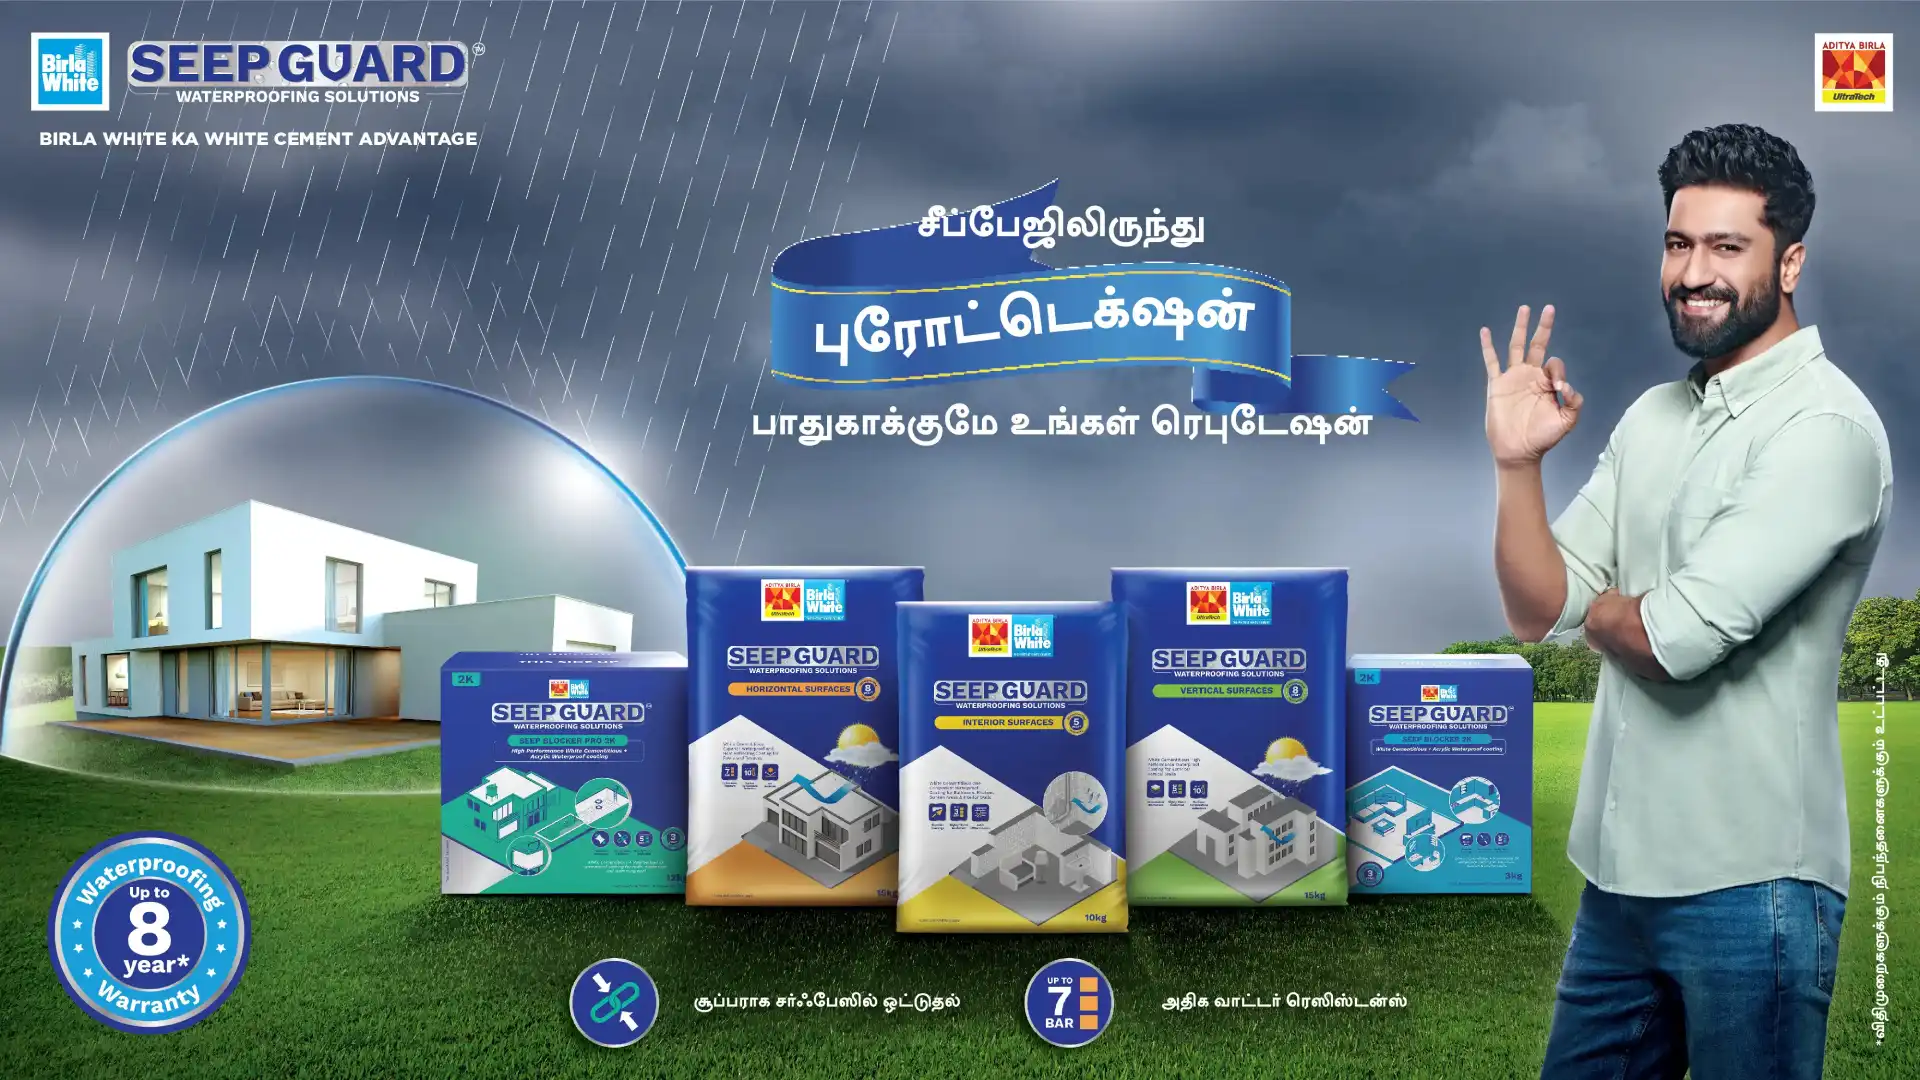 Waterproofing Solutions Products from Birla White